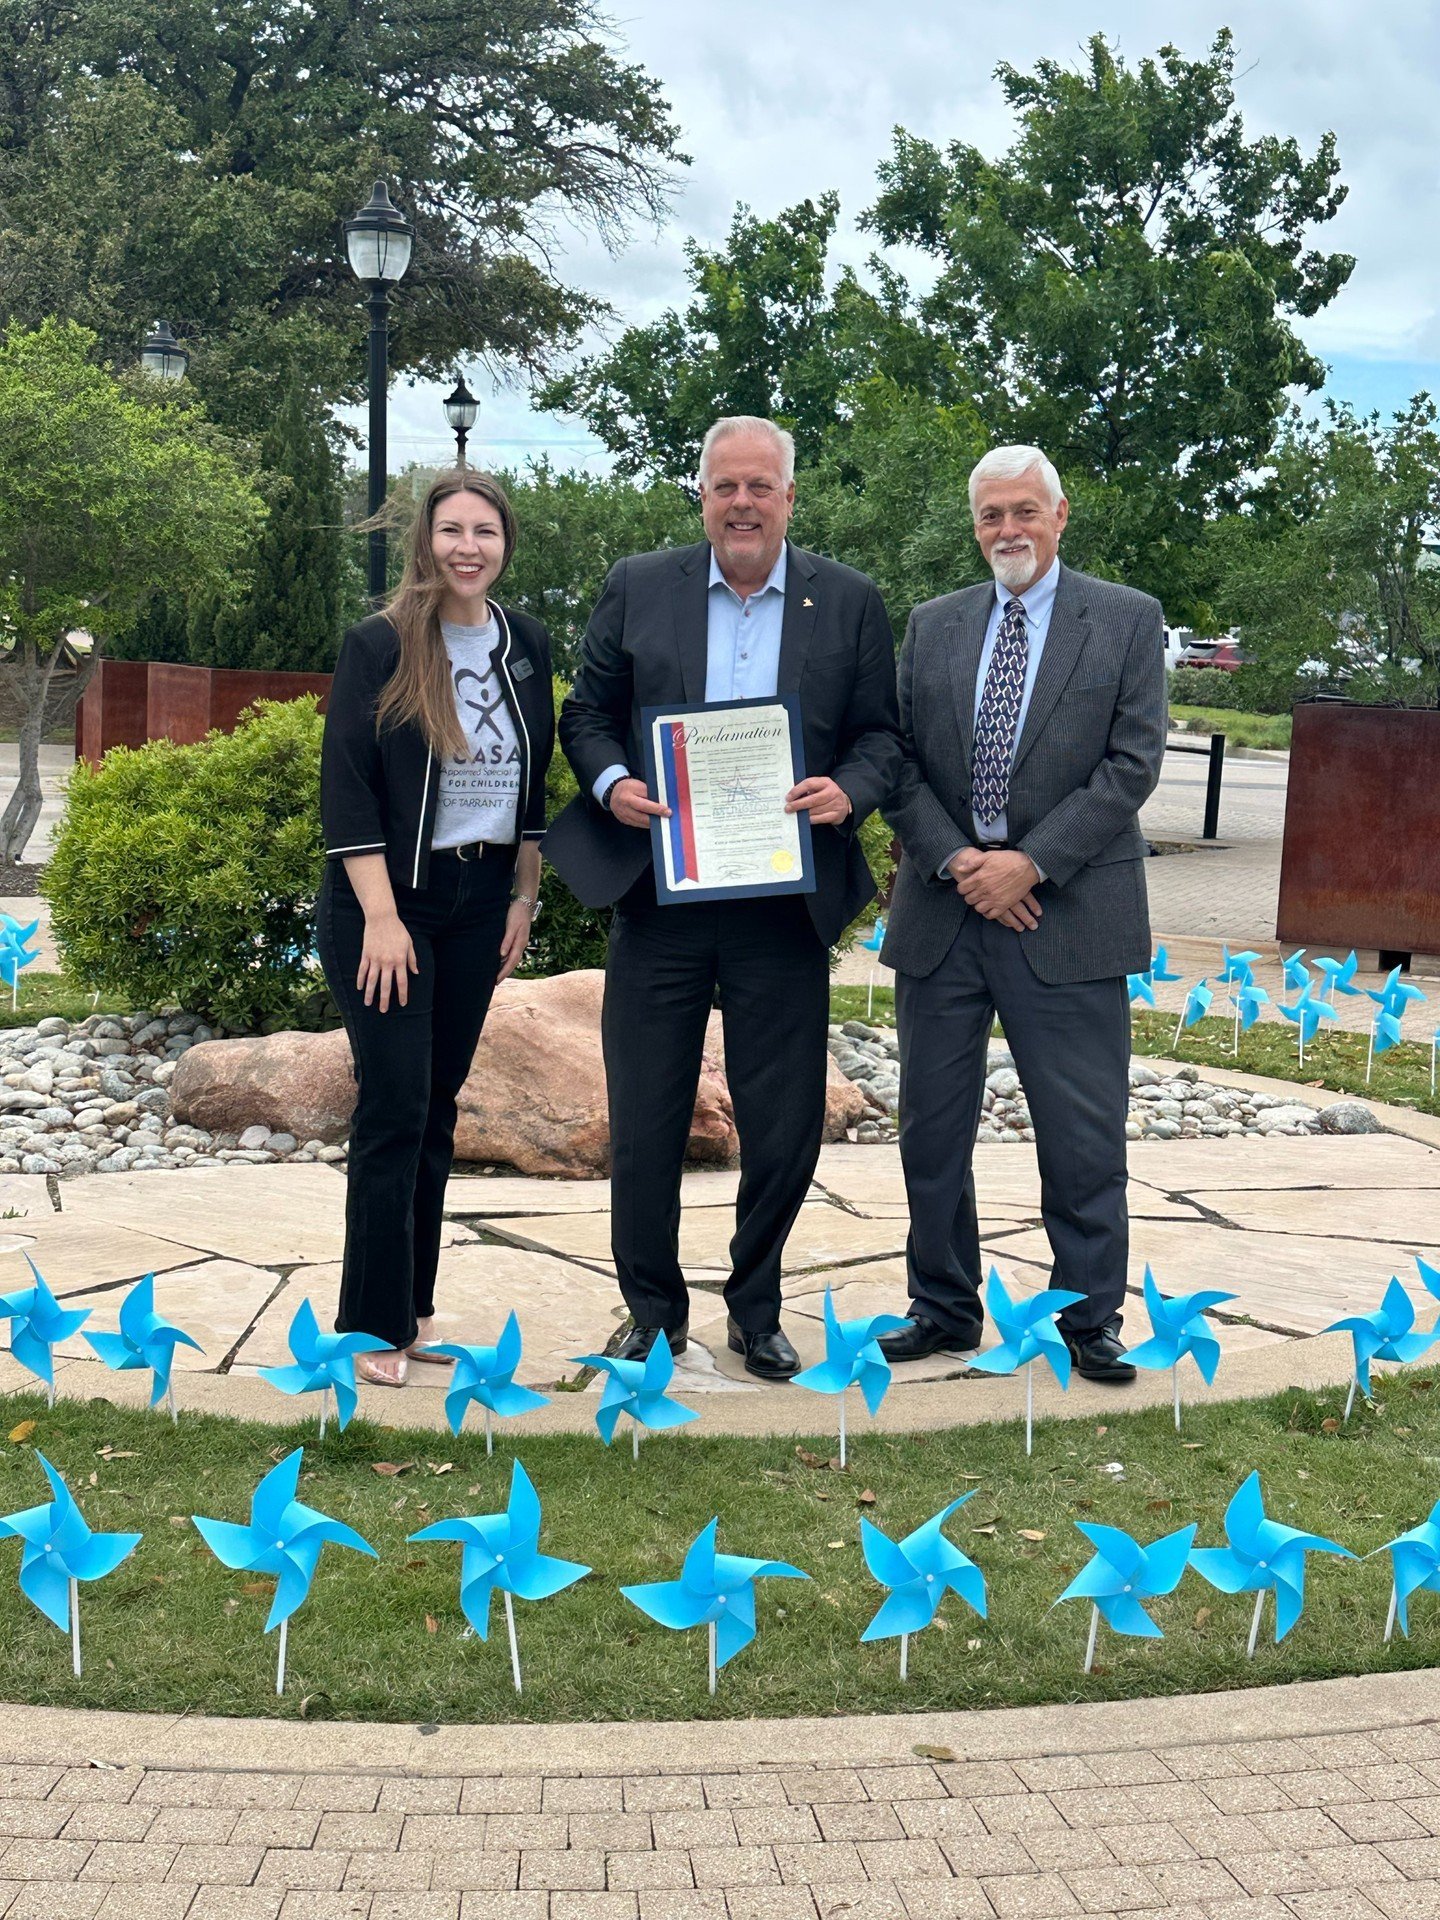 Thank you to Arlington Mayor Jim Ross for presenting a city proclamation in honor of Child Abuse Prevention Month. We appreciate your support! #capm #arlingtontx